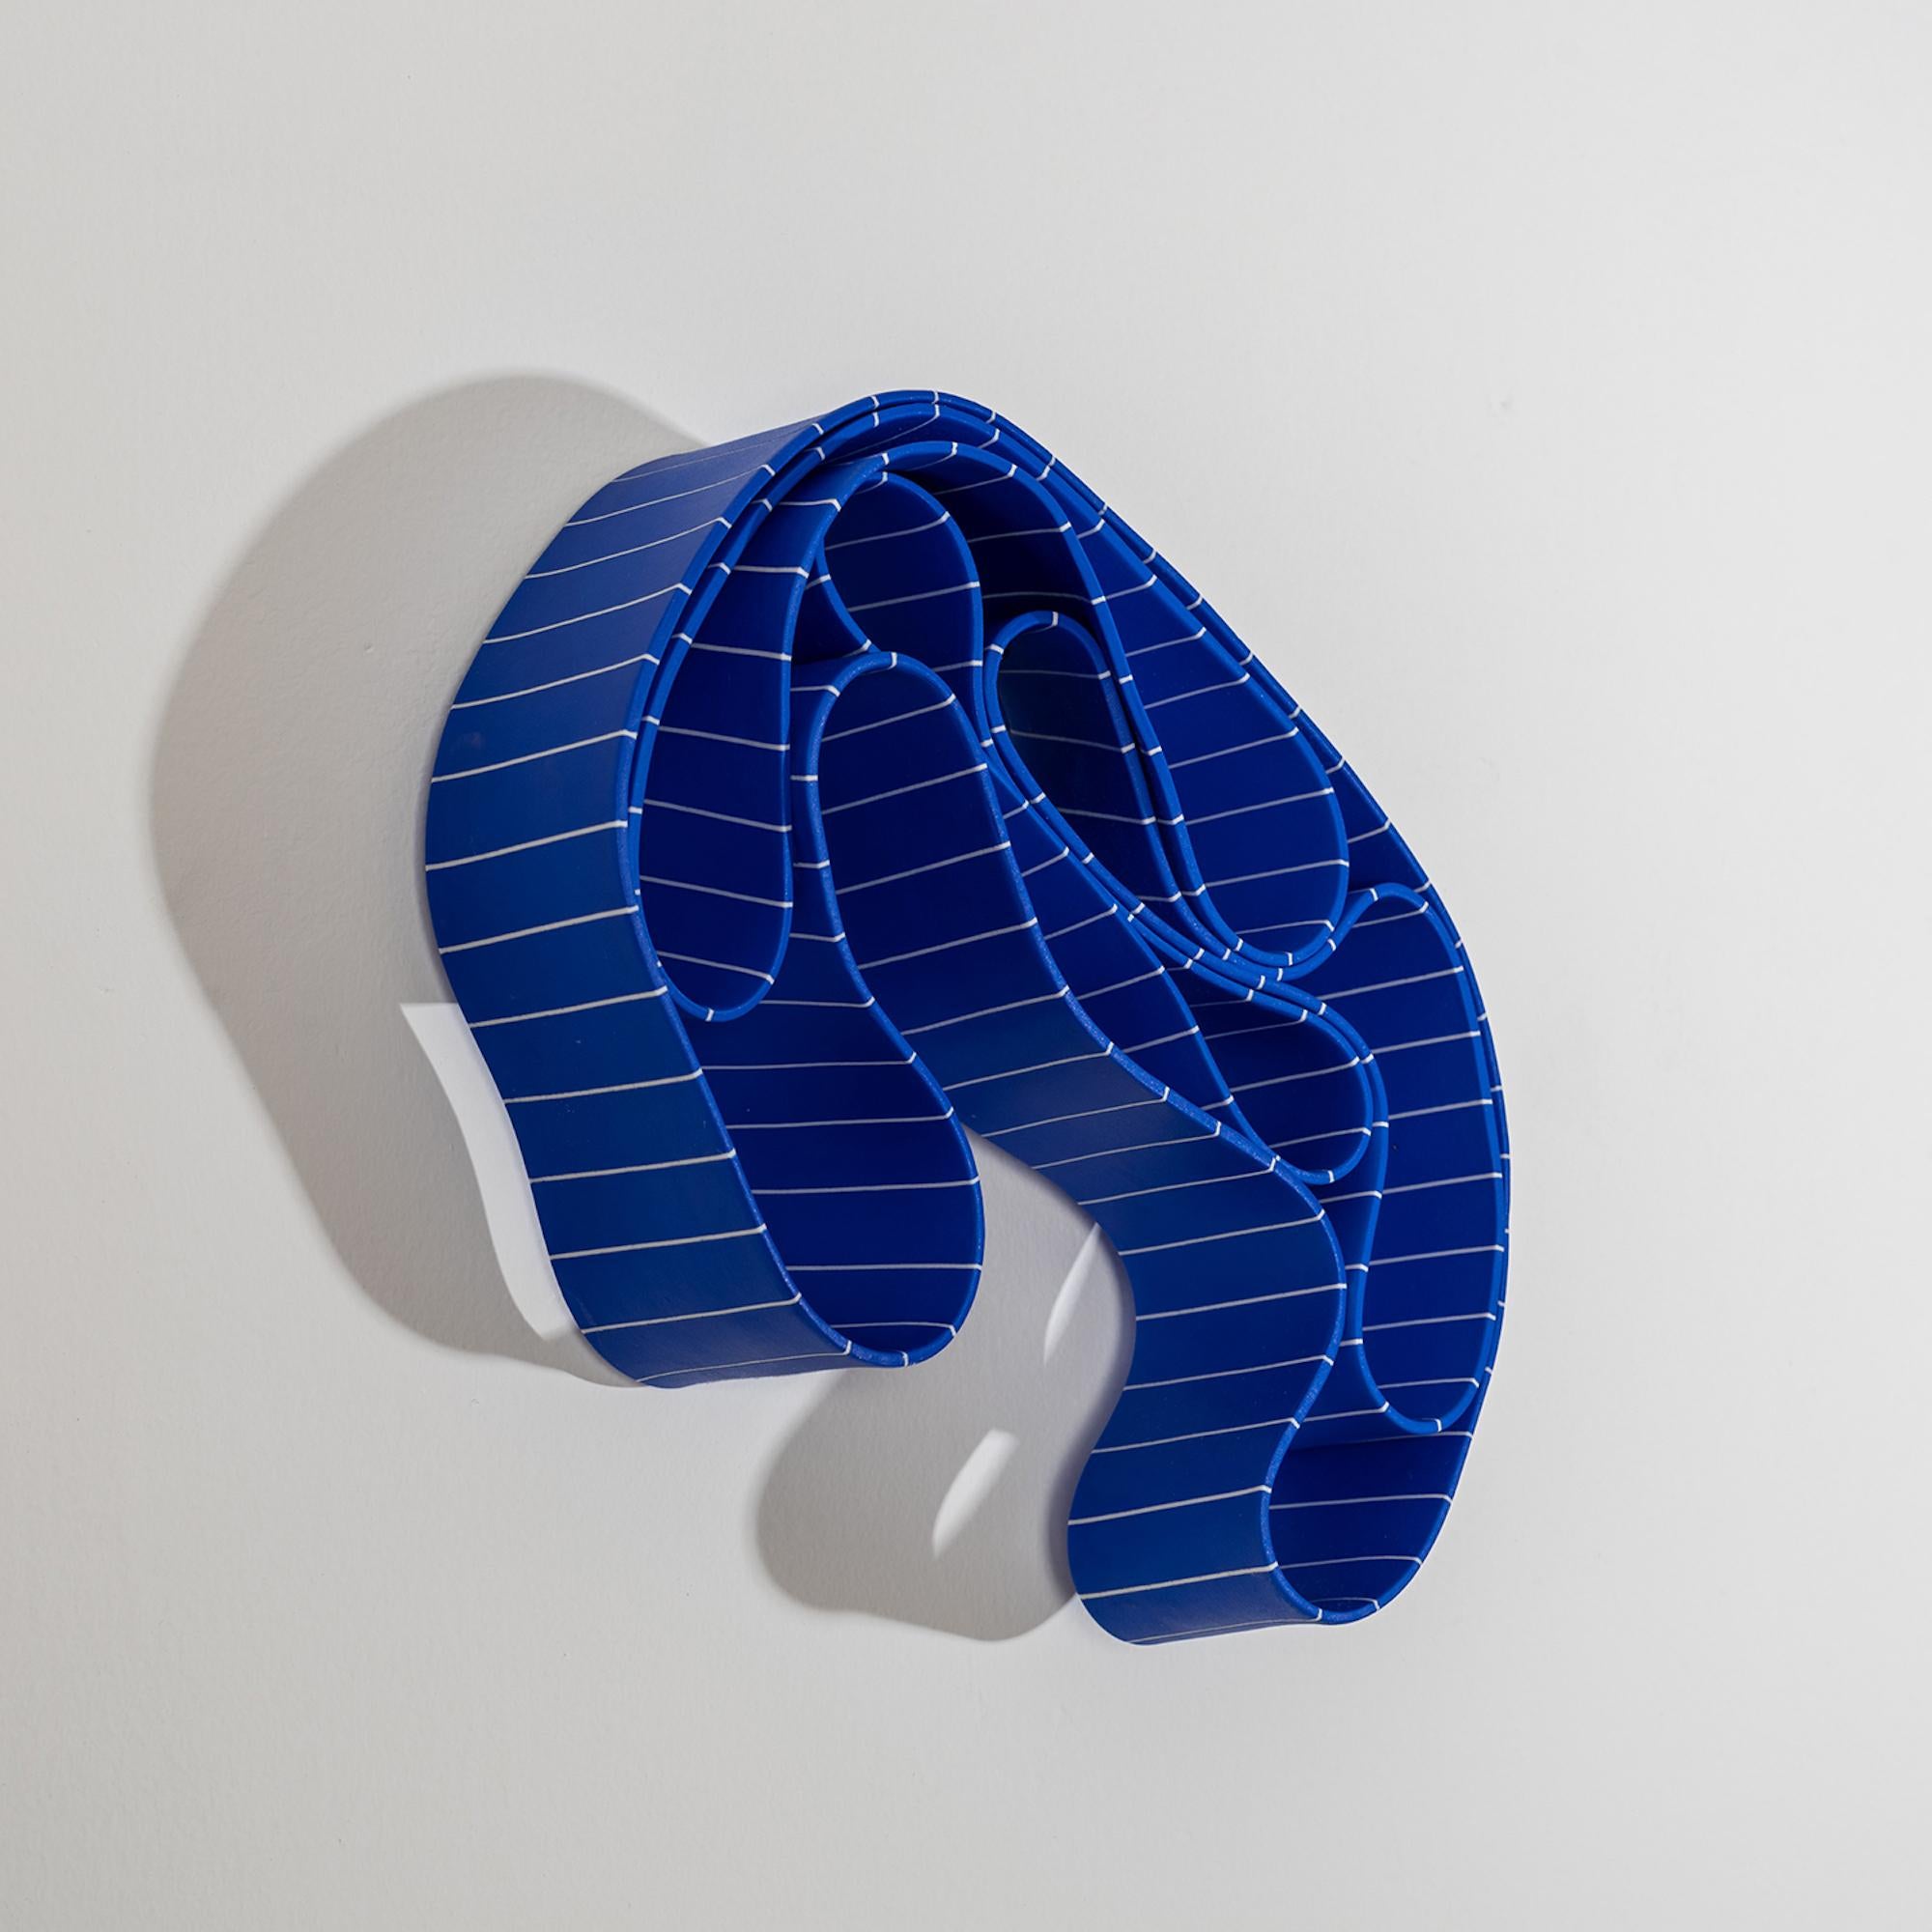 Wall Object #3 by Simcha Even-Chen - Porcelain sculpture, blue, white lines For Sale 2